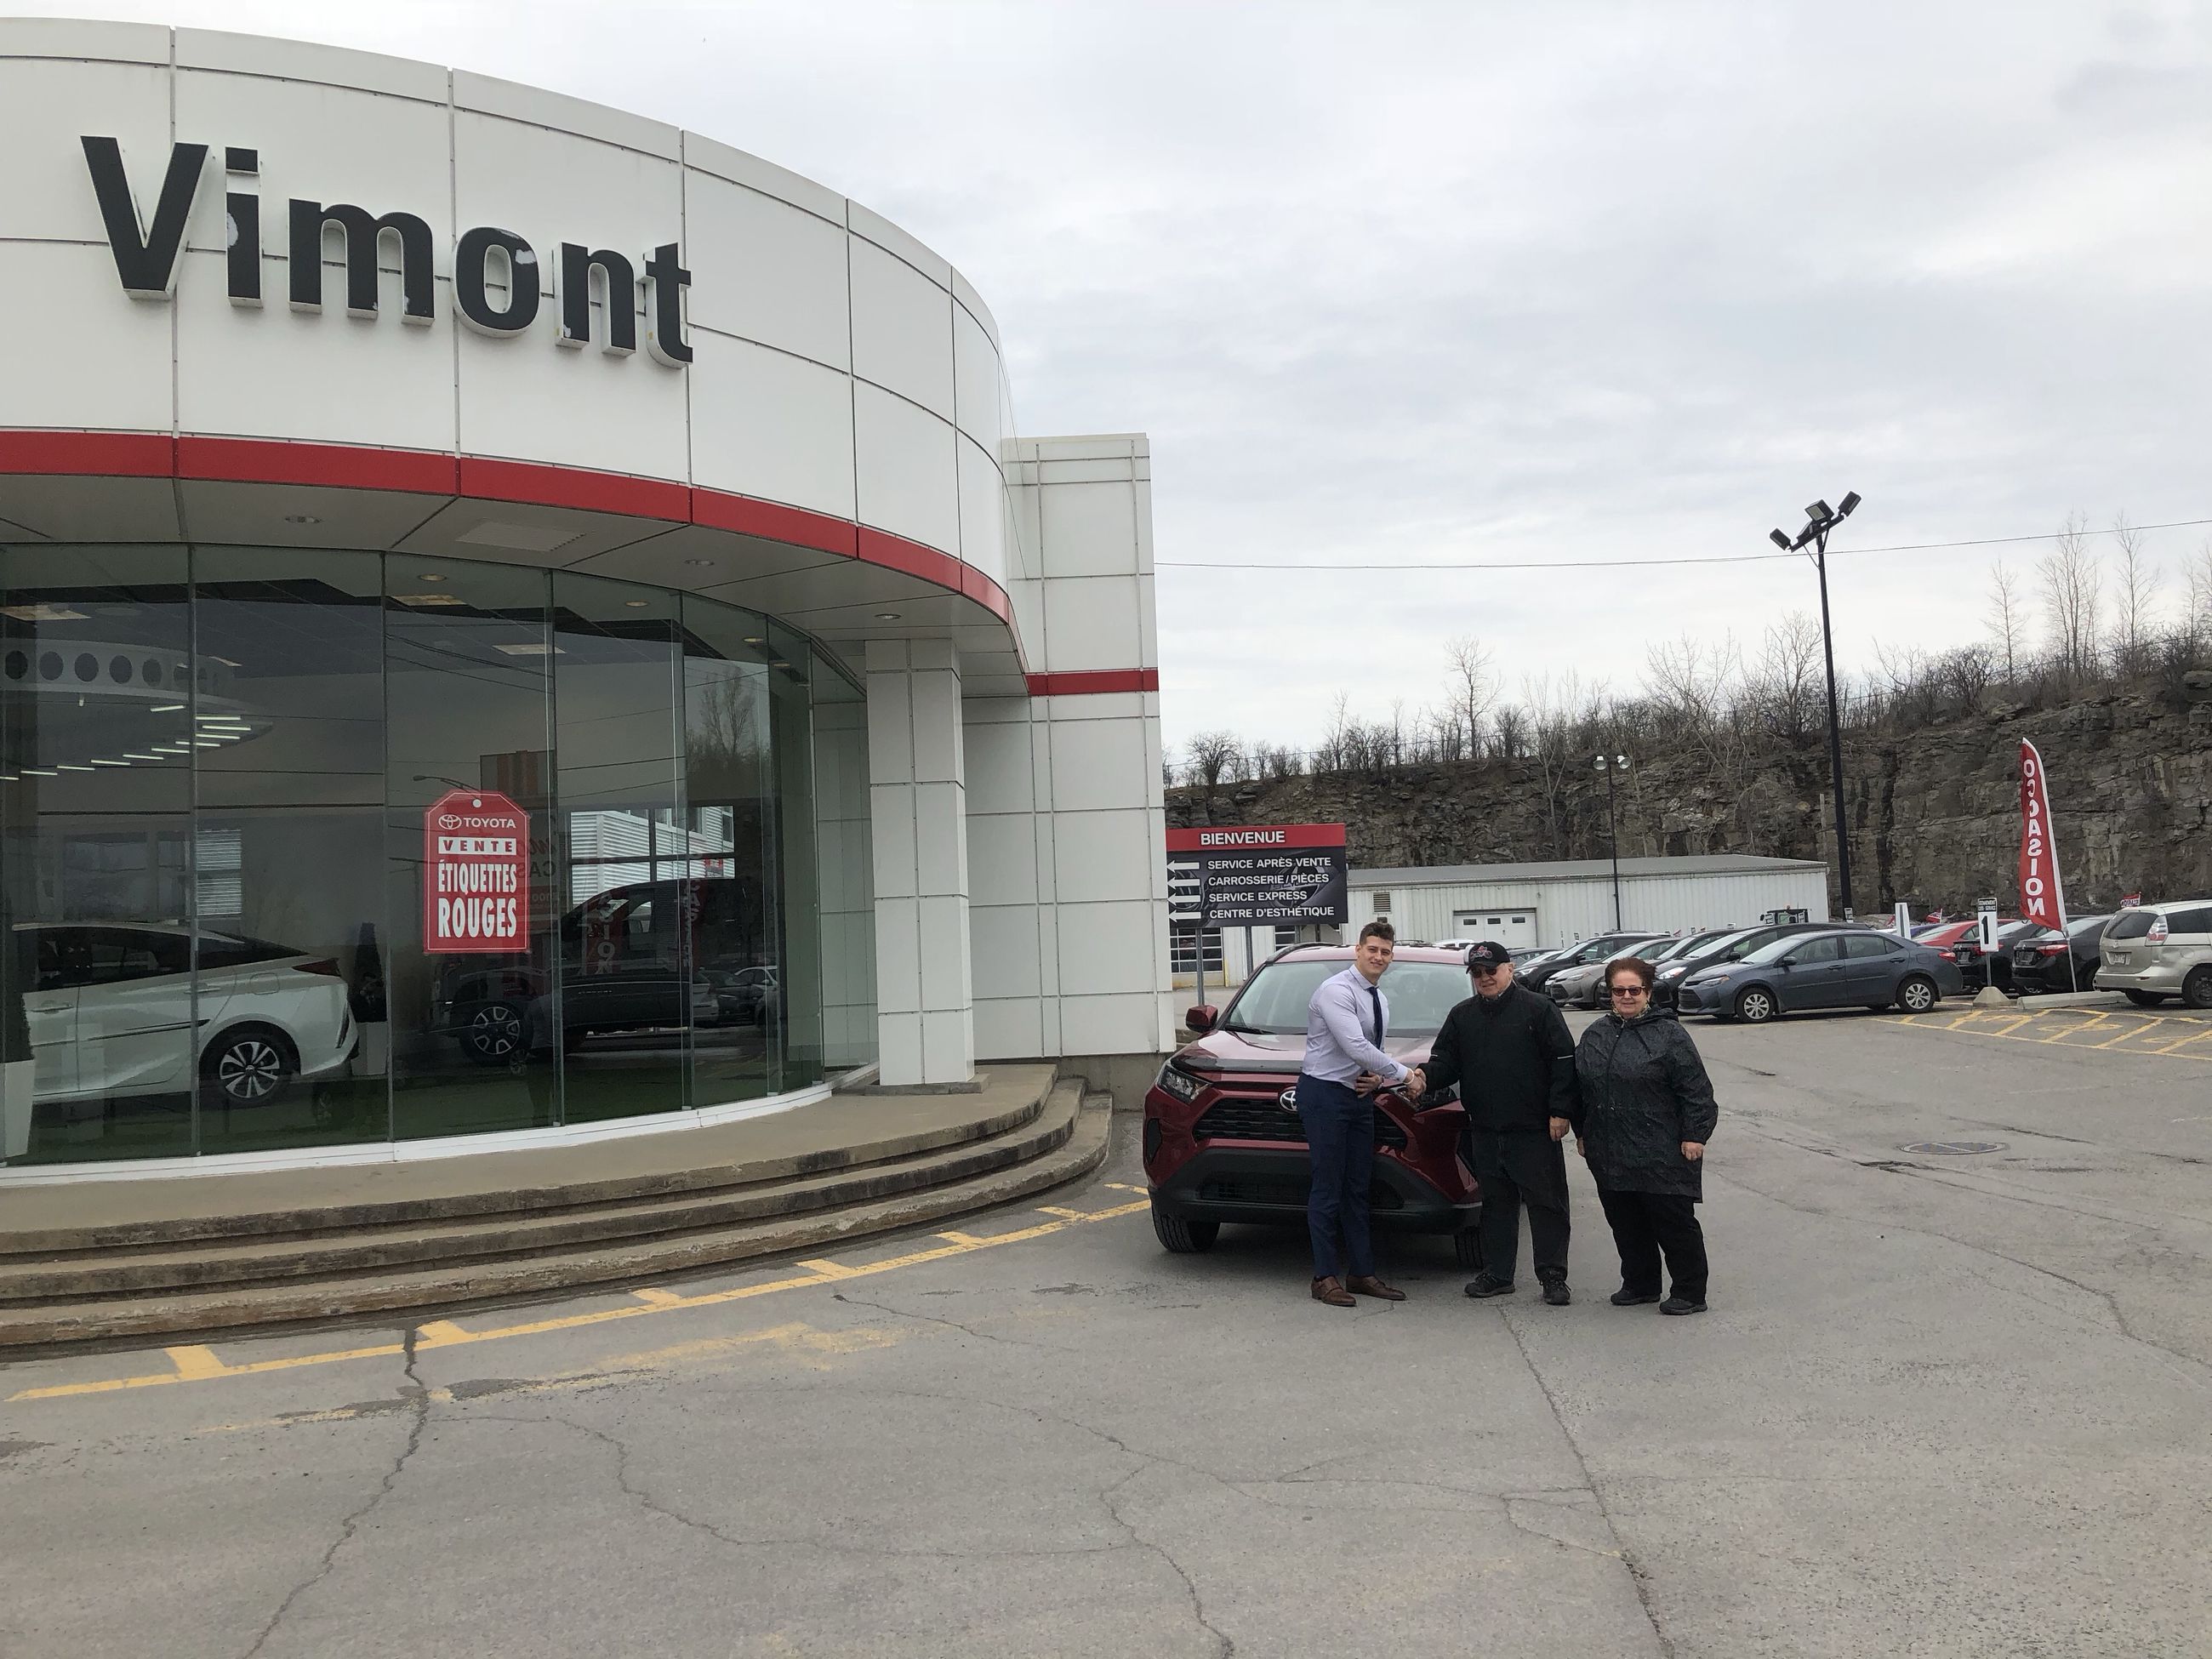 A Huge Thank You to Vimont Toyota